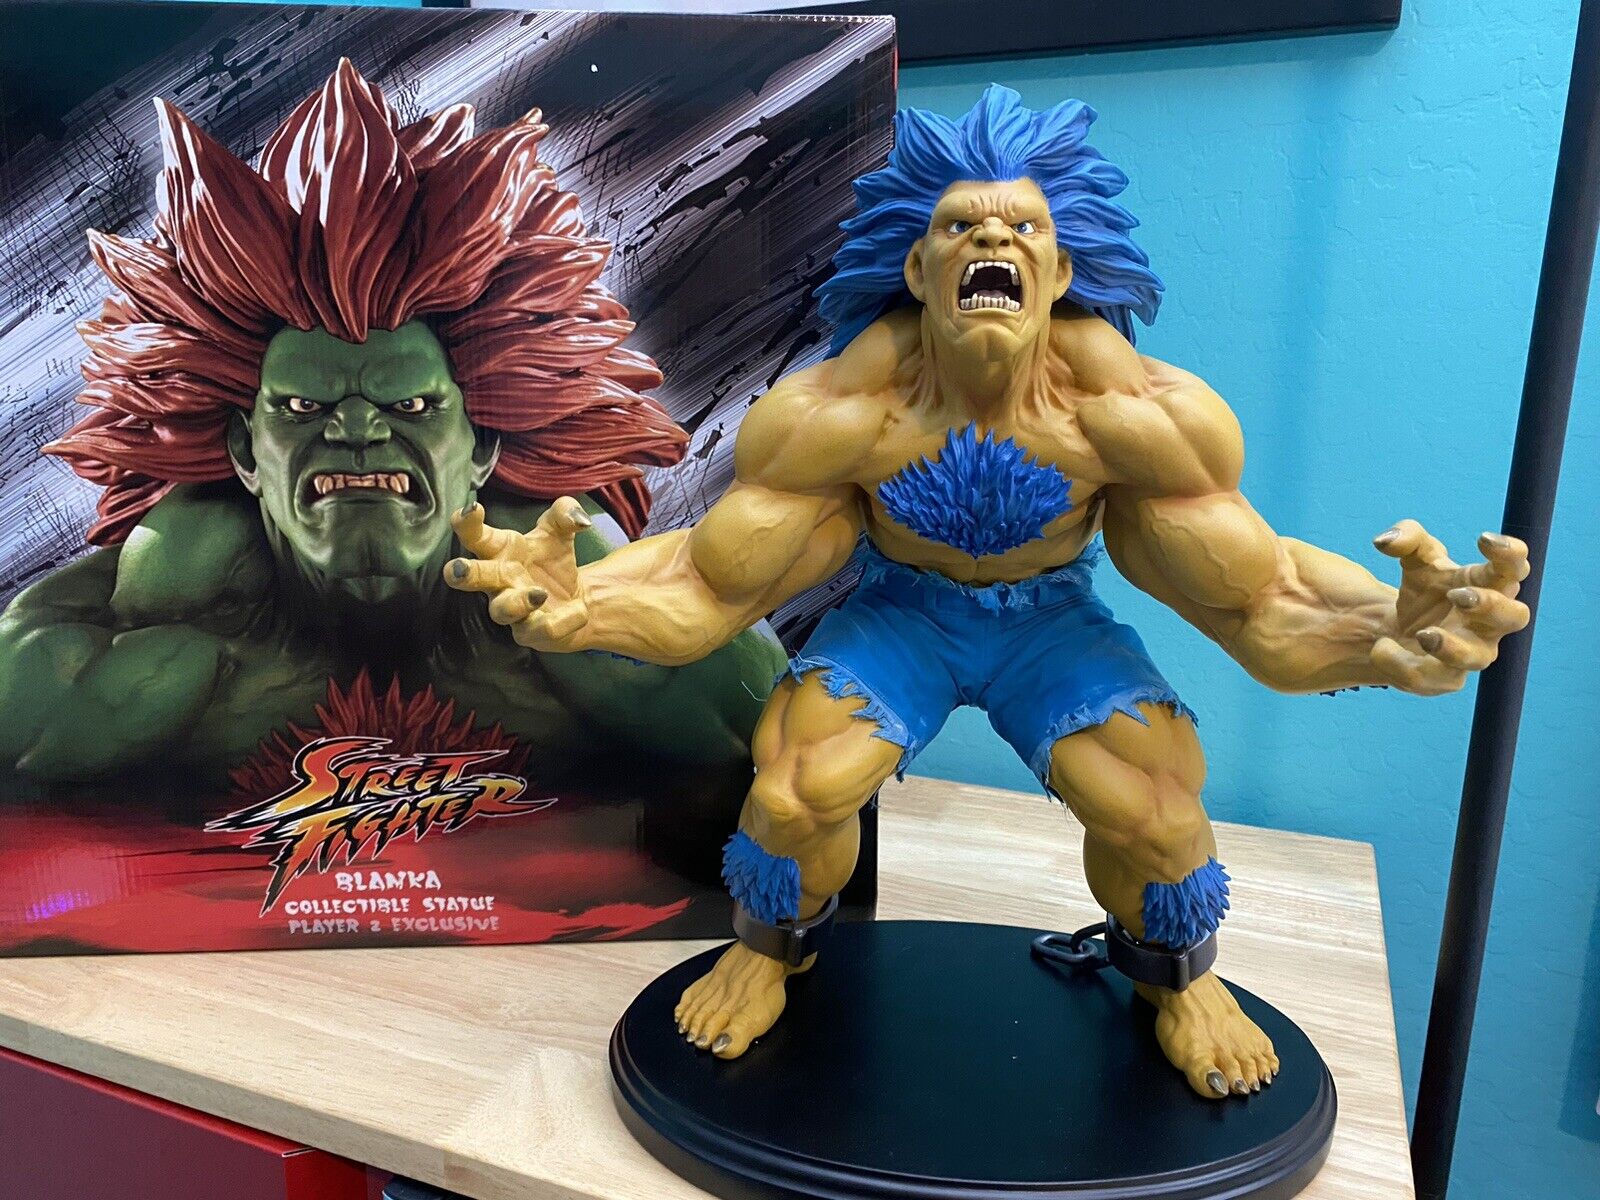 PCS STREET FIGHTER BLANKA PLAYER 2 EXCLUSIVE STATUE SIDESHOW 1/4 Scale Statue